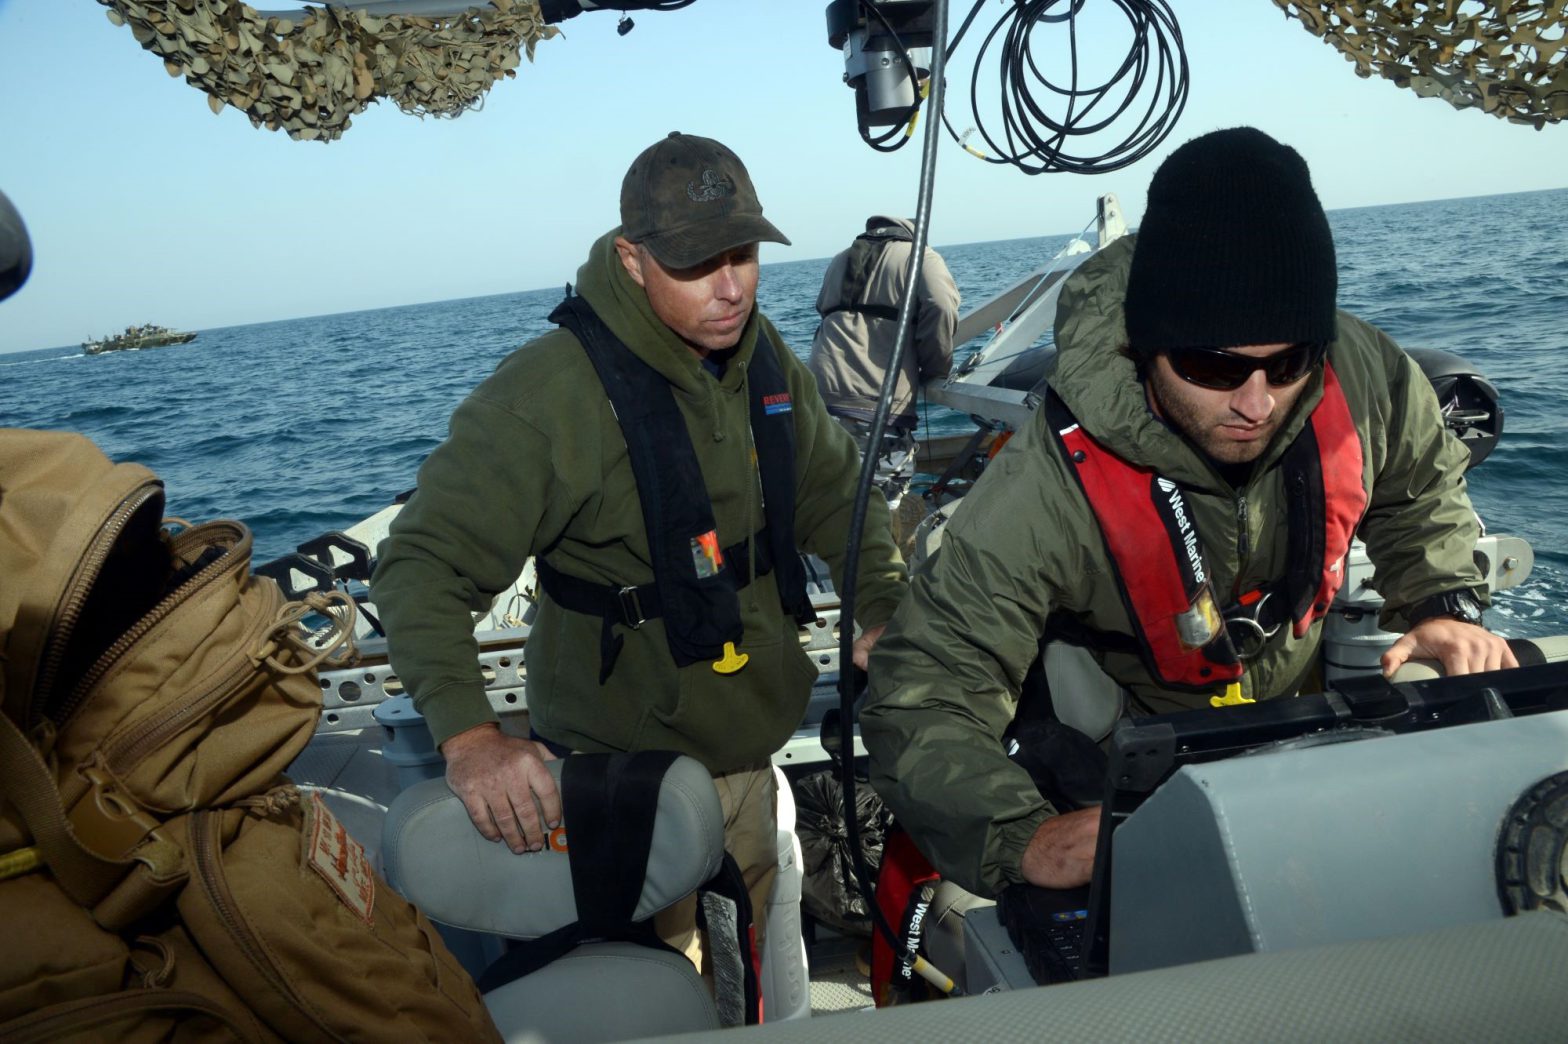 Unmanned underwater vehicle (UUV) operators in a boat